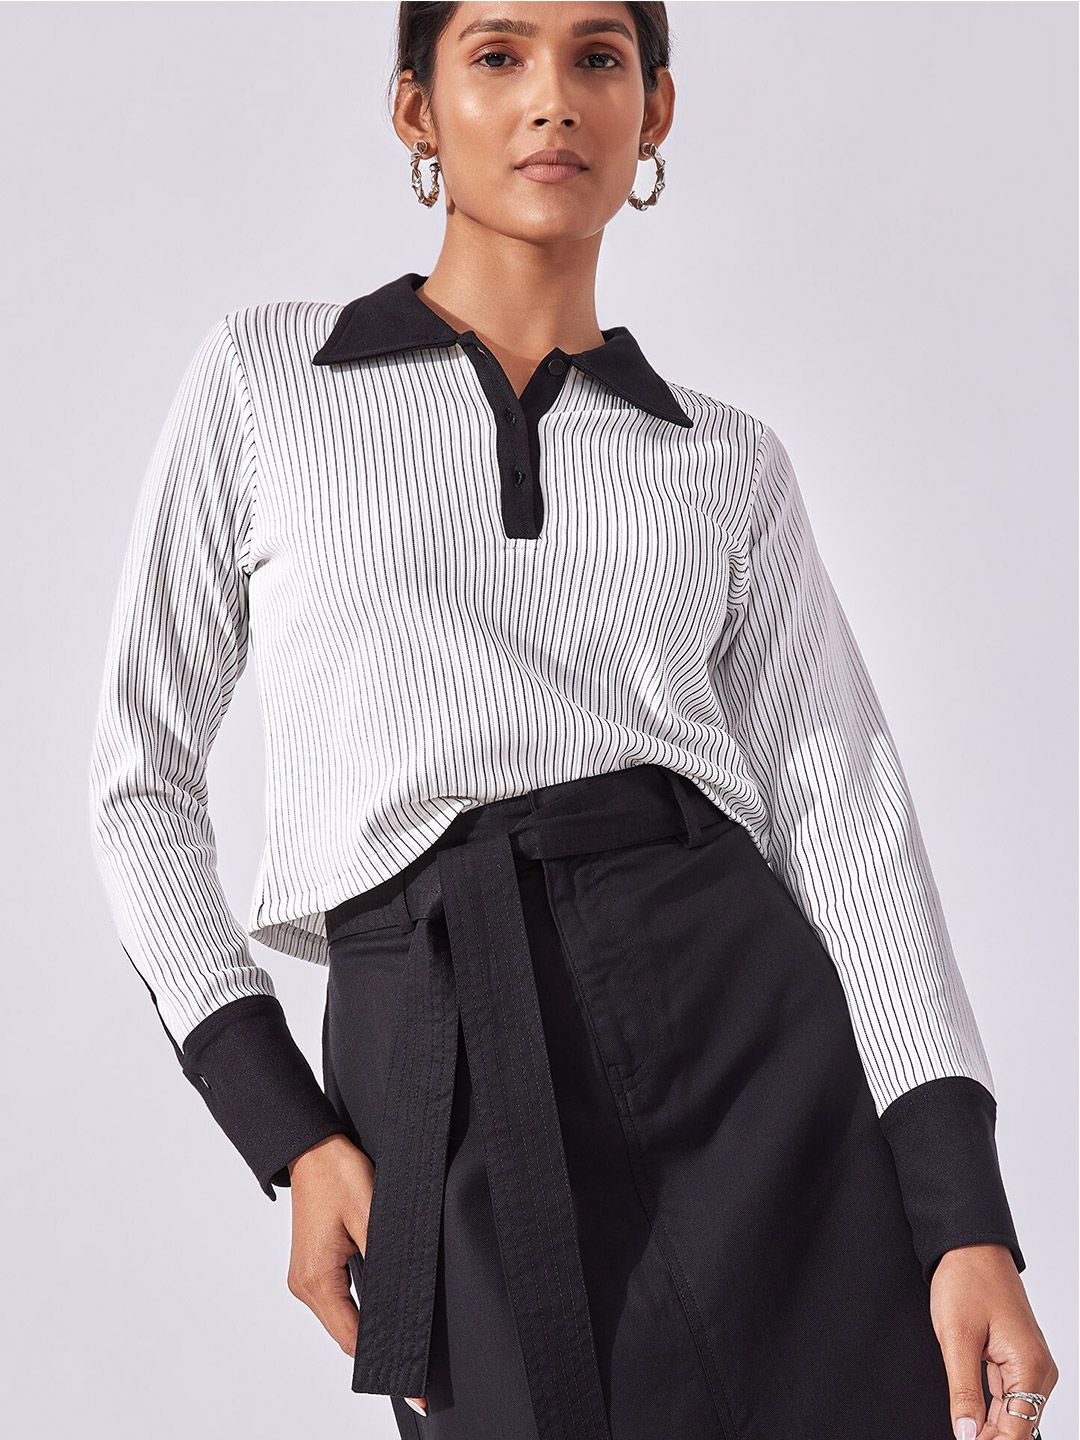 The Label Life White & Black Striped Shirt Style Top Price in India